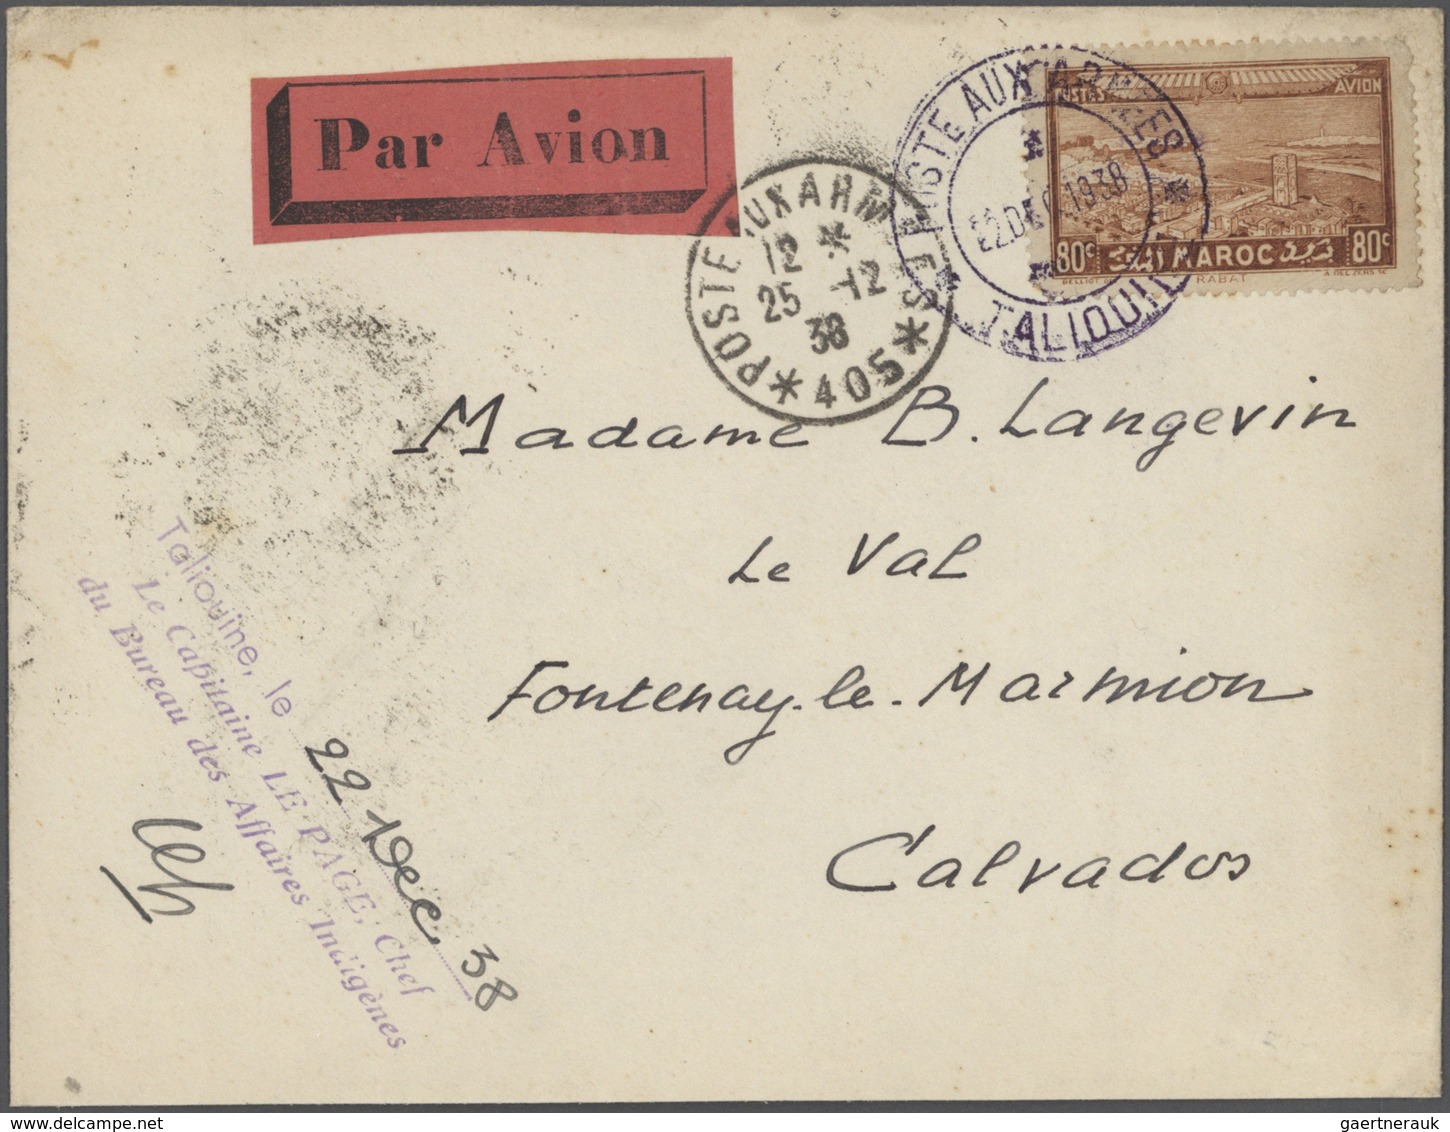 23586 Marokko: 1890/1970 (ca.), comprehensive collection with main value in the apprx. 340 covers/cards/st